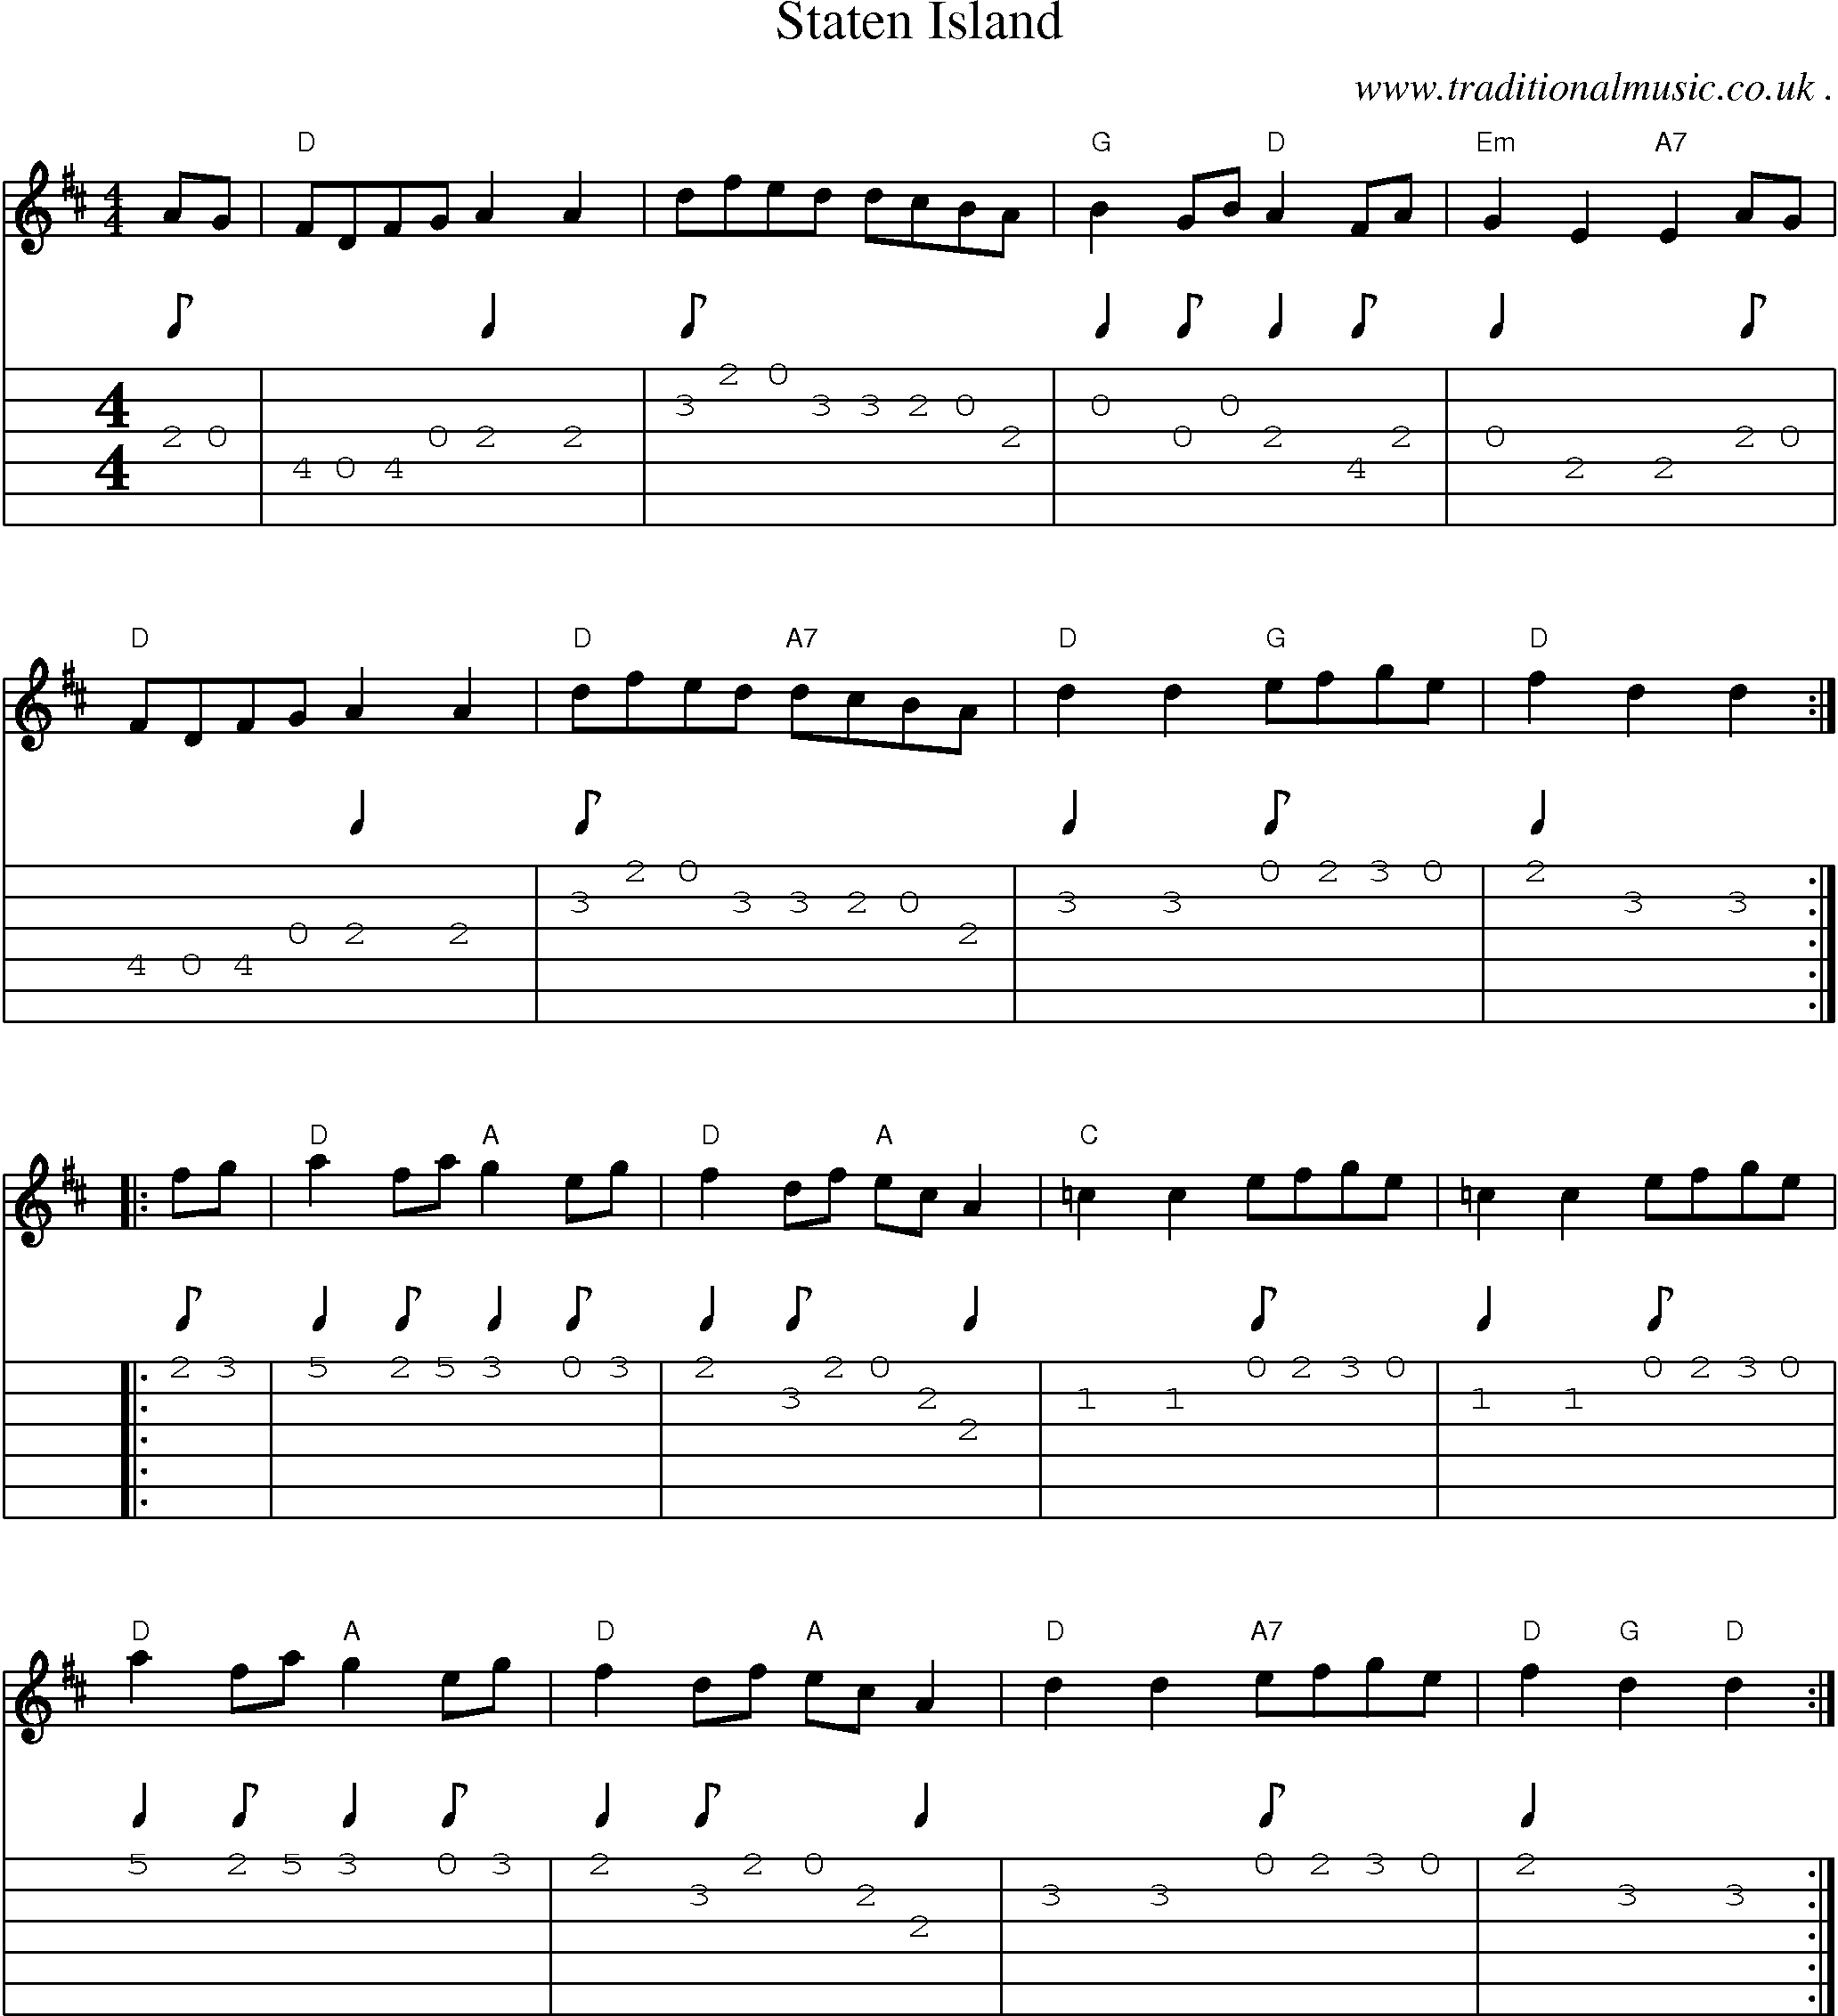 Music Score and Guitar Tabs for Staten Island